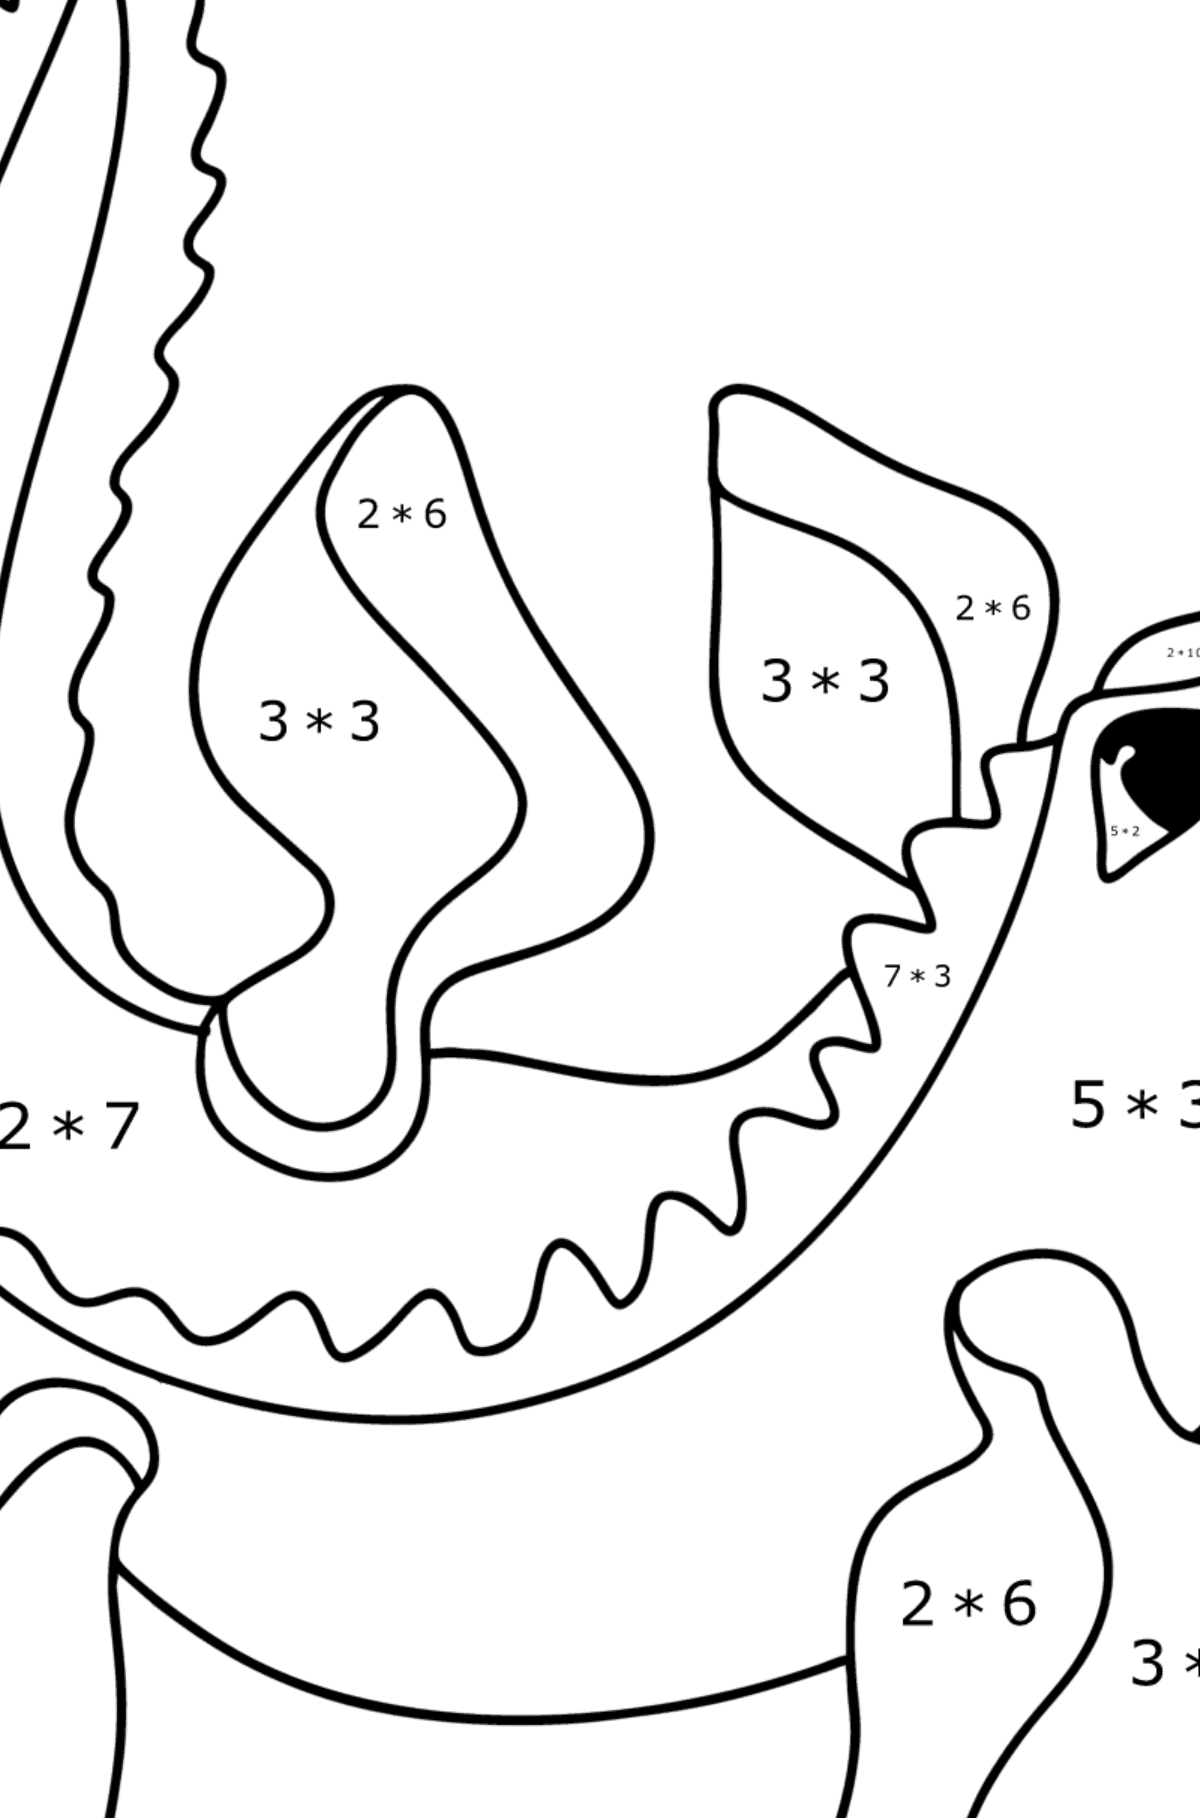 Mosasaurus coloring page - Math Coloring - Multiplication for Kids